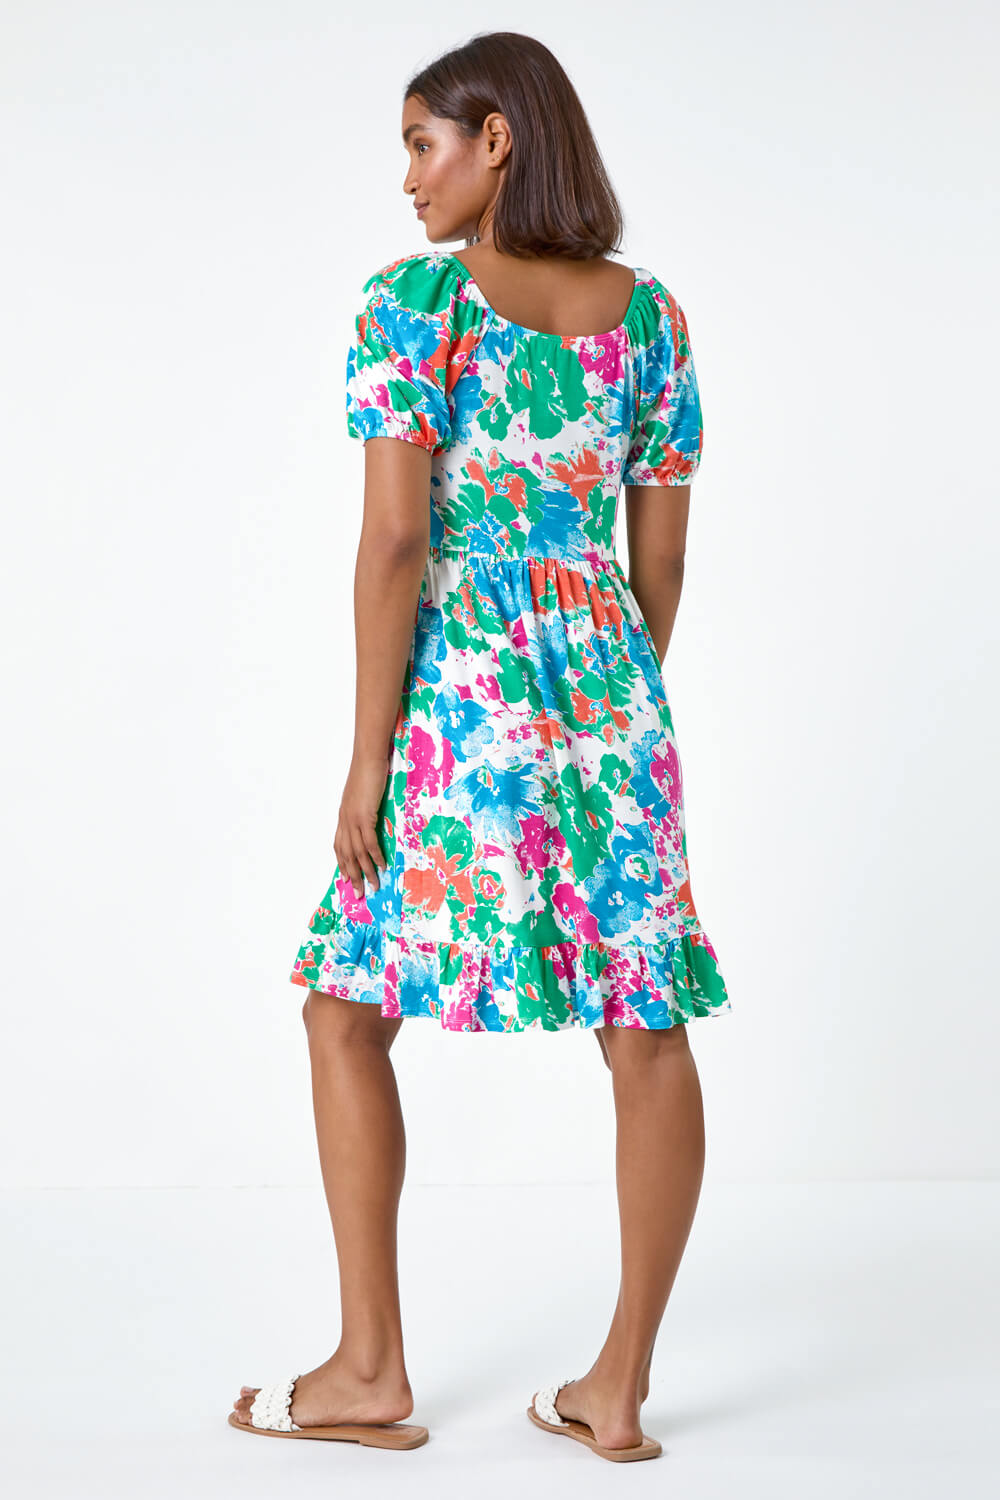 Blue Abstract Floral Ruched Frill Stretch Dress, Image 3 of 5